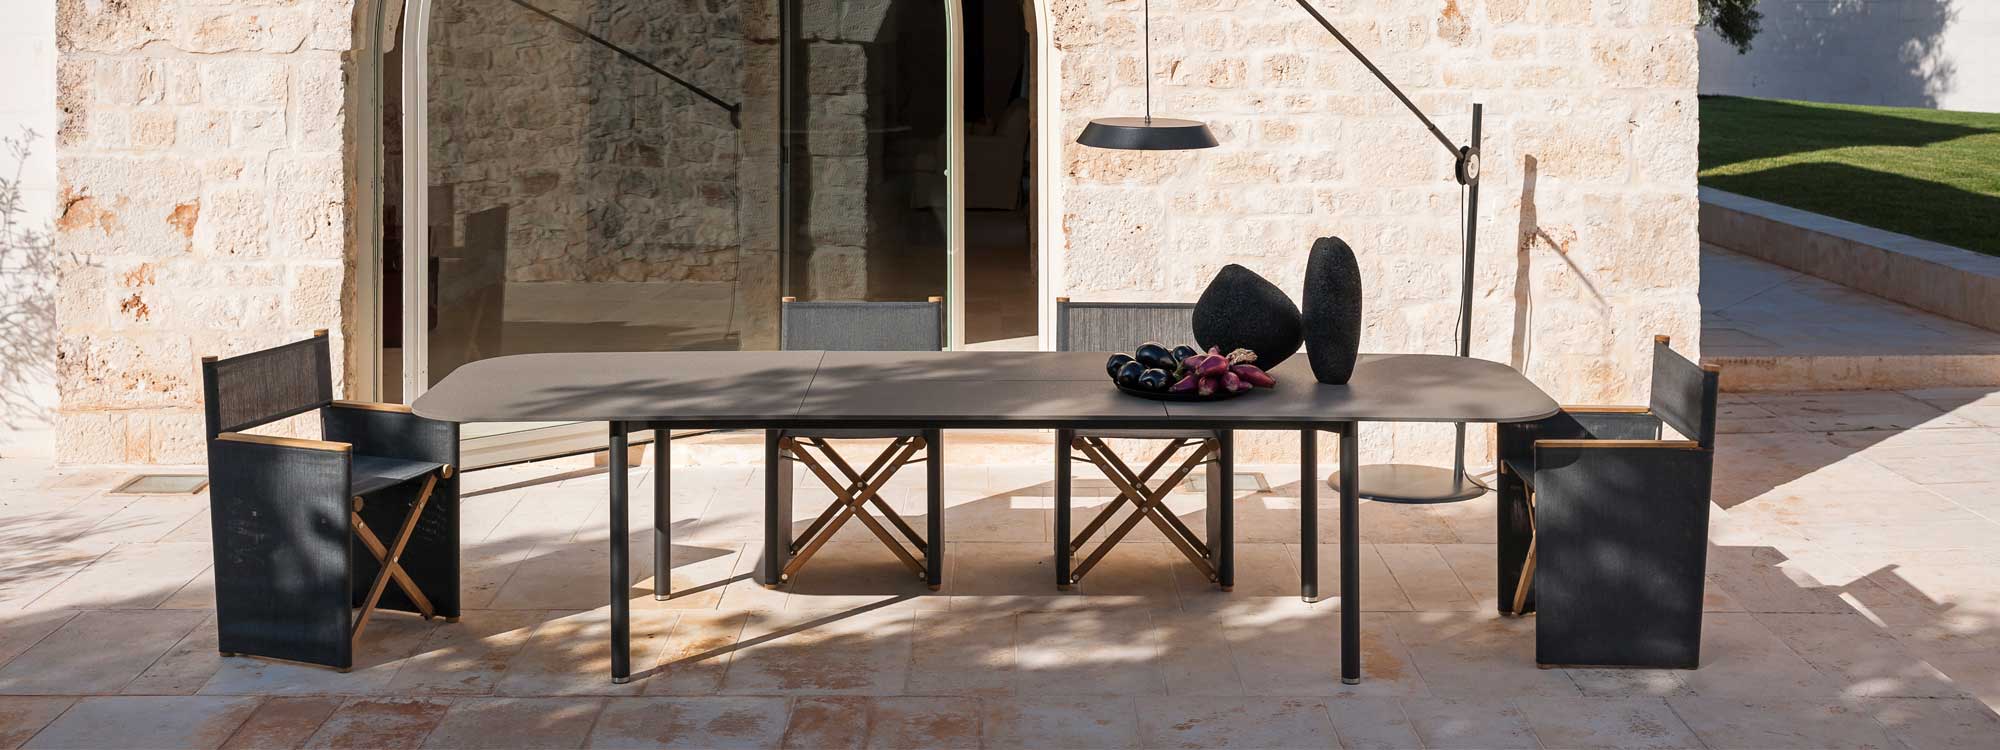 Image of RODA Piper extending garden table and Orson modern director chairs in light and shade of rustic Italian courtyard